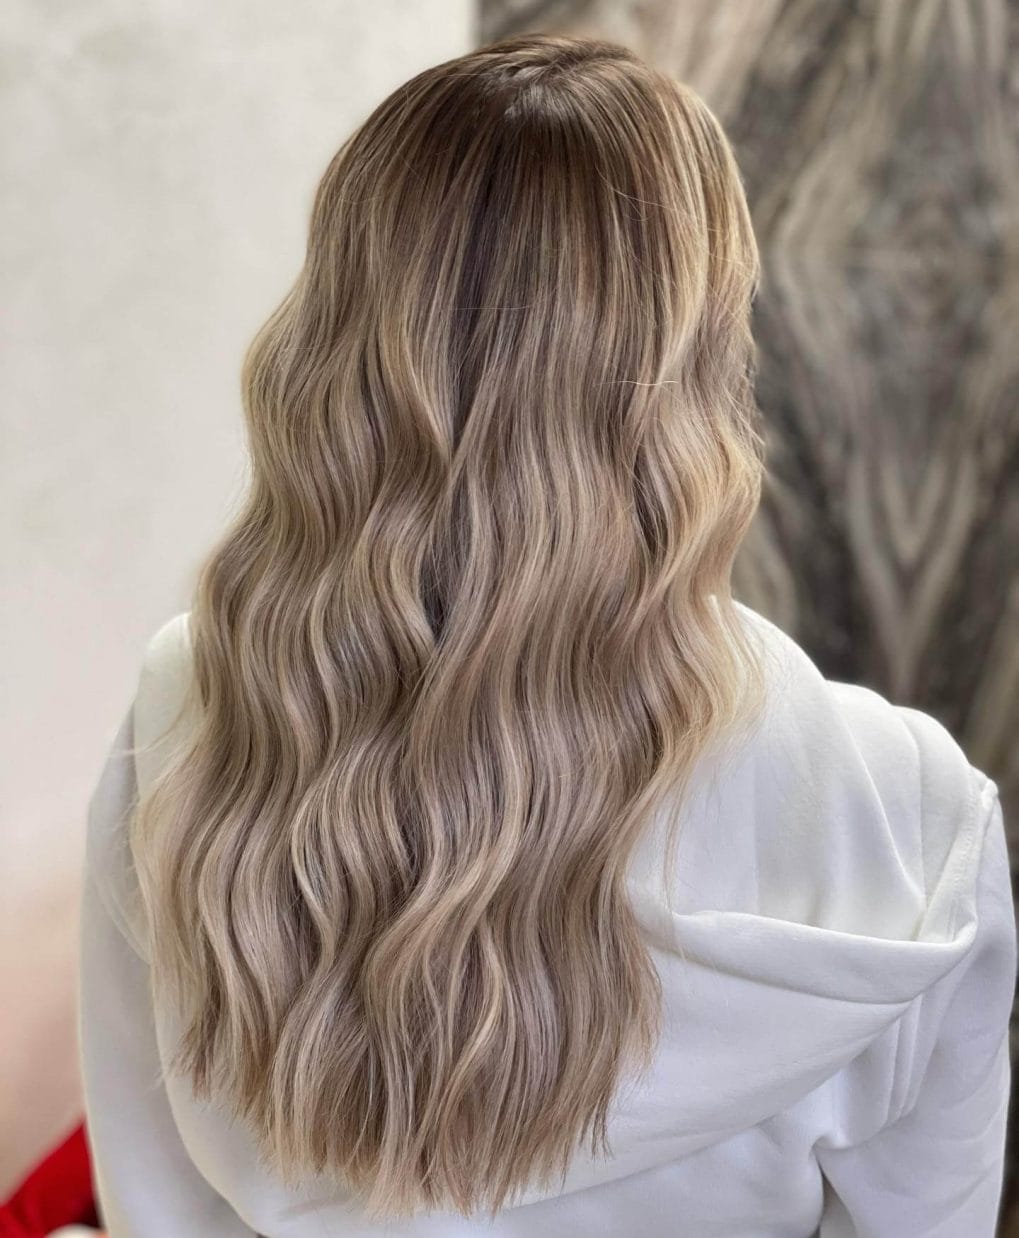 Long hairstyle with cool and warm blonde balayage, perfect for adding winter dimension.